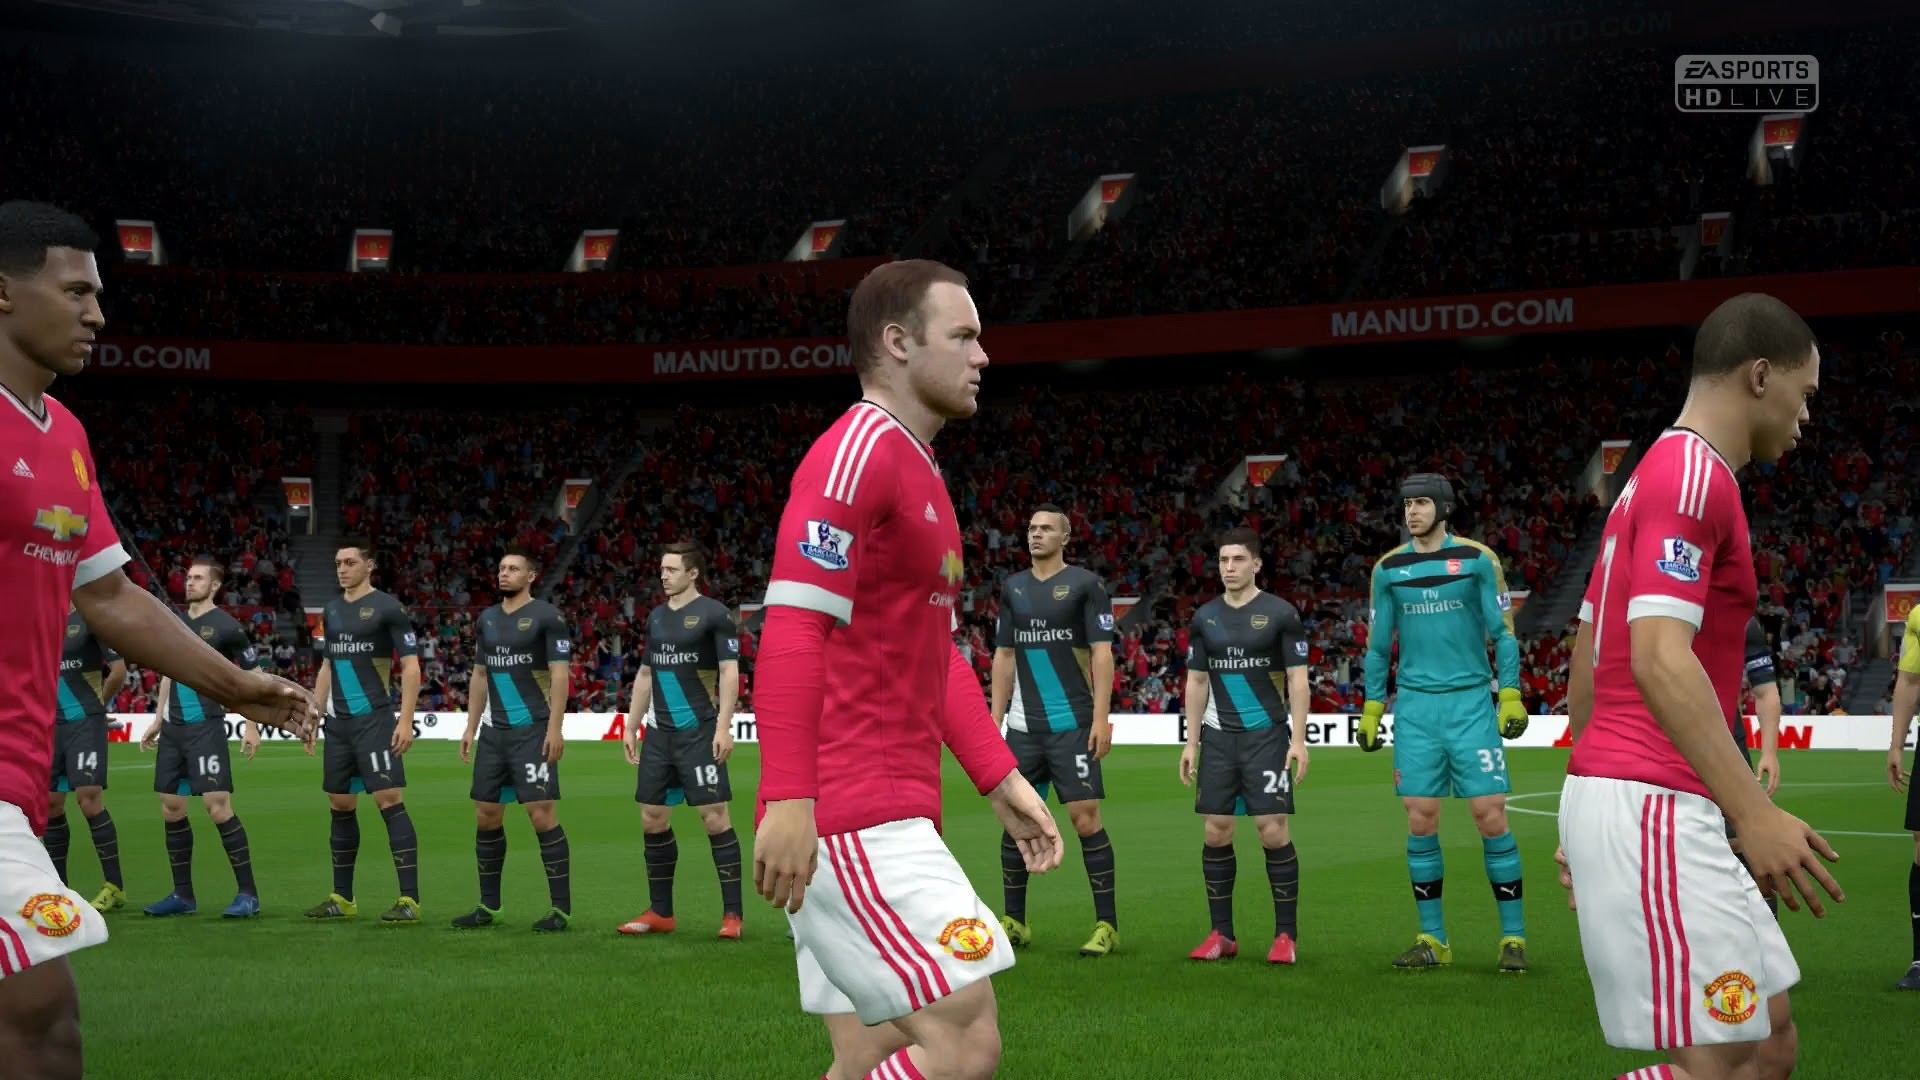 1920x1080 FIFA 16 | Manchester United vs Arsenal - Full Gameplay (PS4/Xbox One) -  YouTube